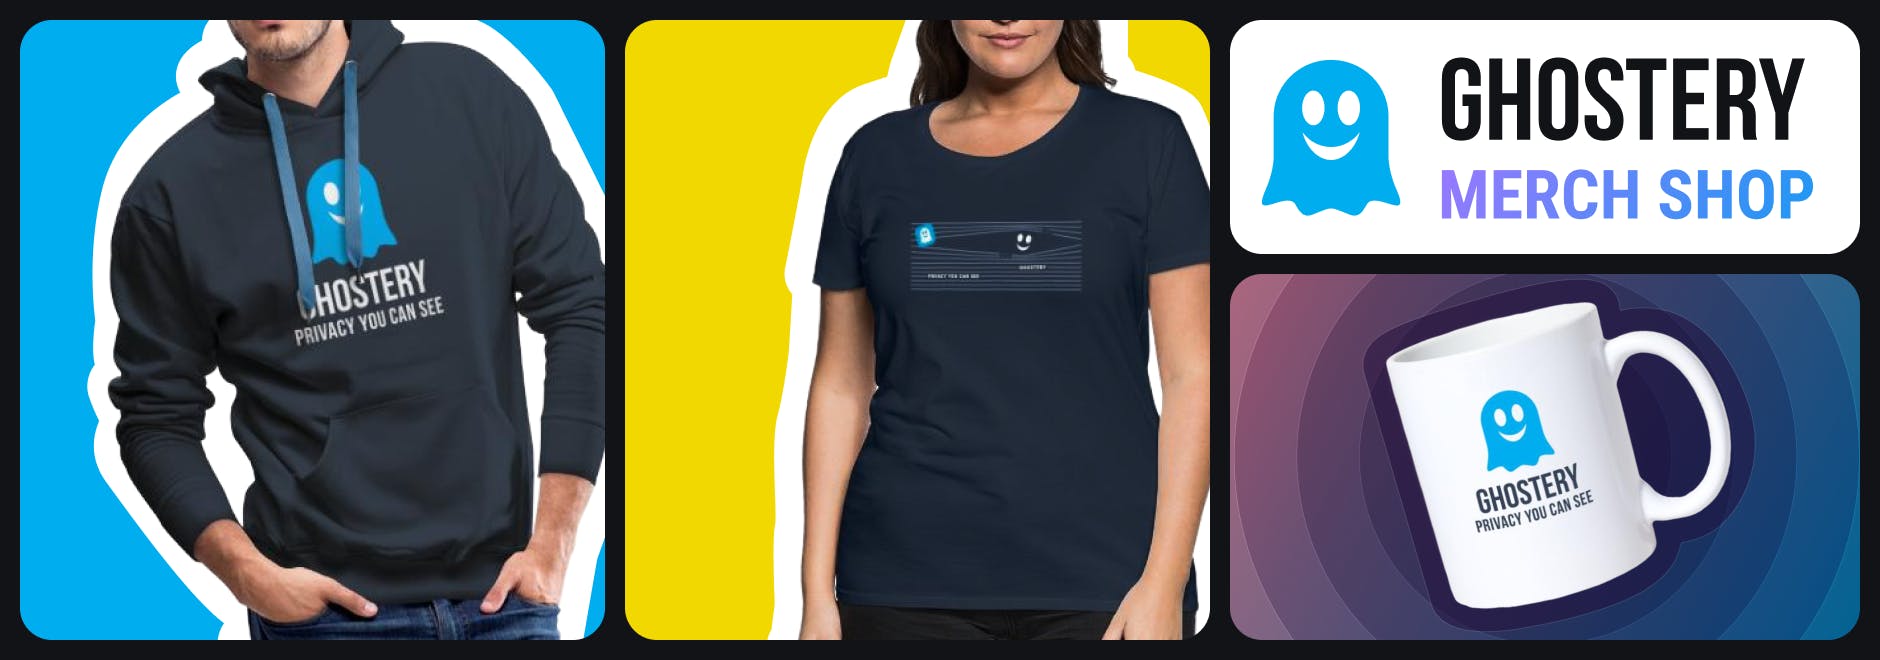 Introducing: Ghostery Merch!